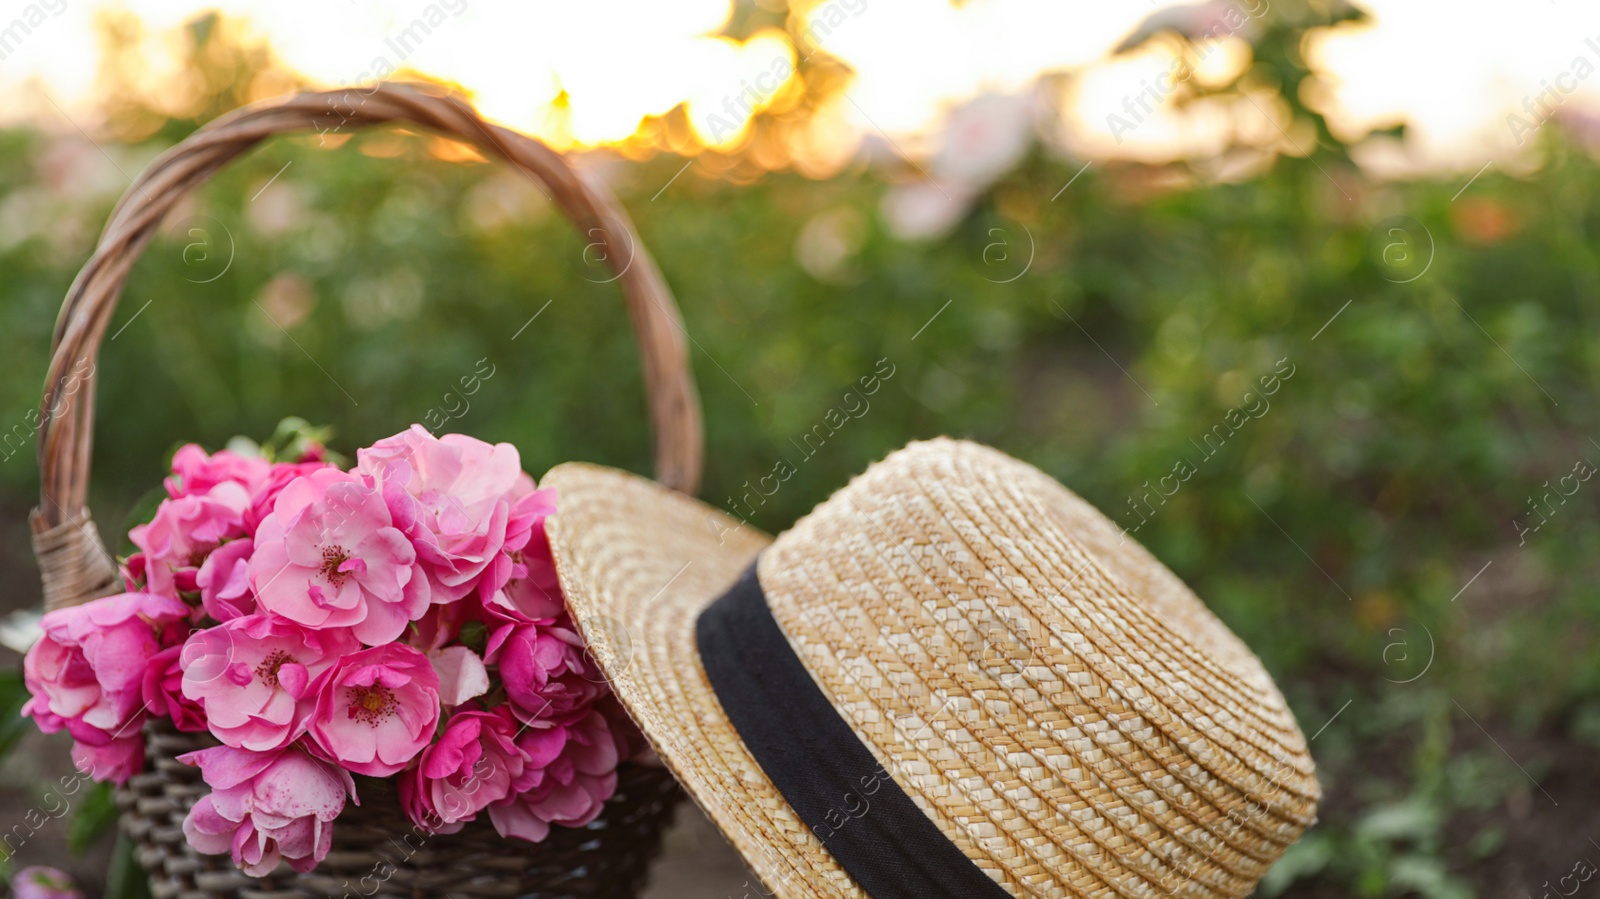 Photo of Straw hat and wicker basket with roses outdoors. Gardening